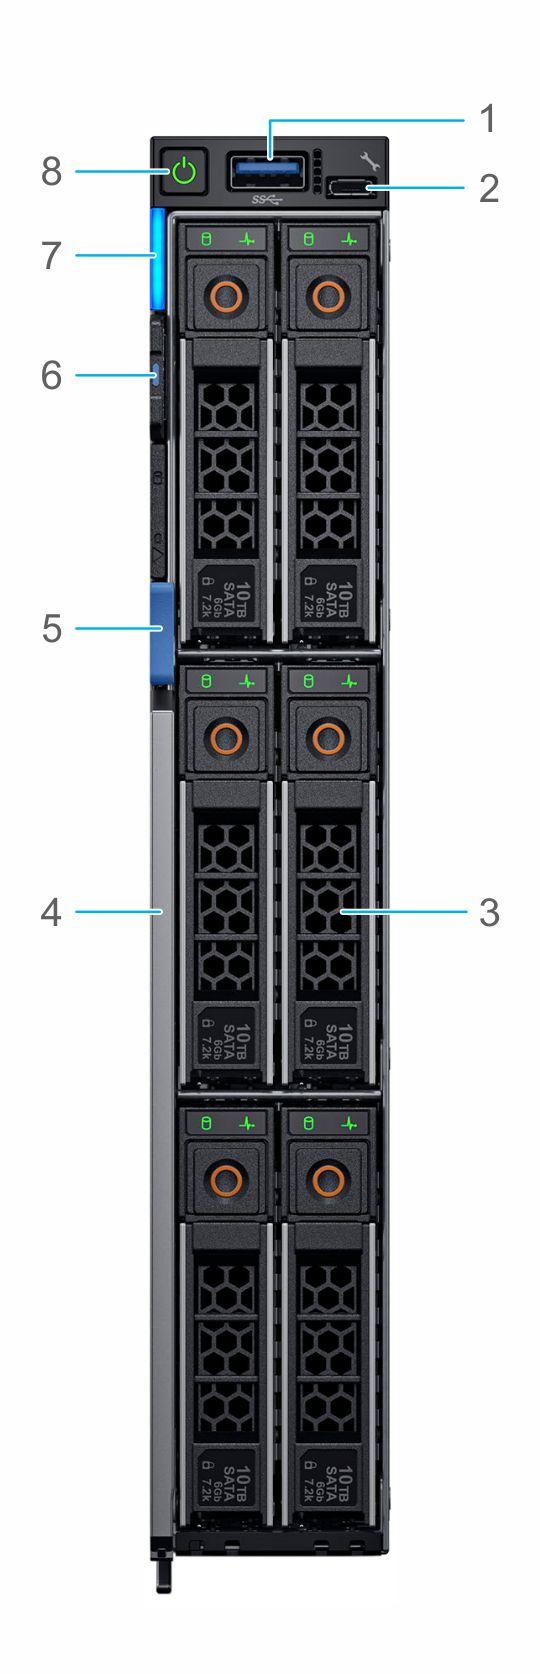 Front view of the system Figure 1. Front view of the 6 drive configuration 1 USB 3.